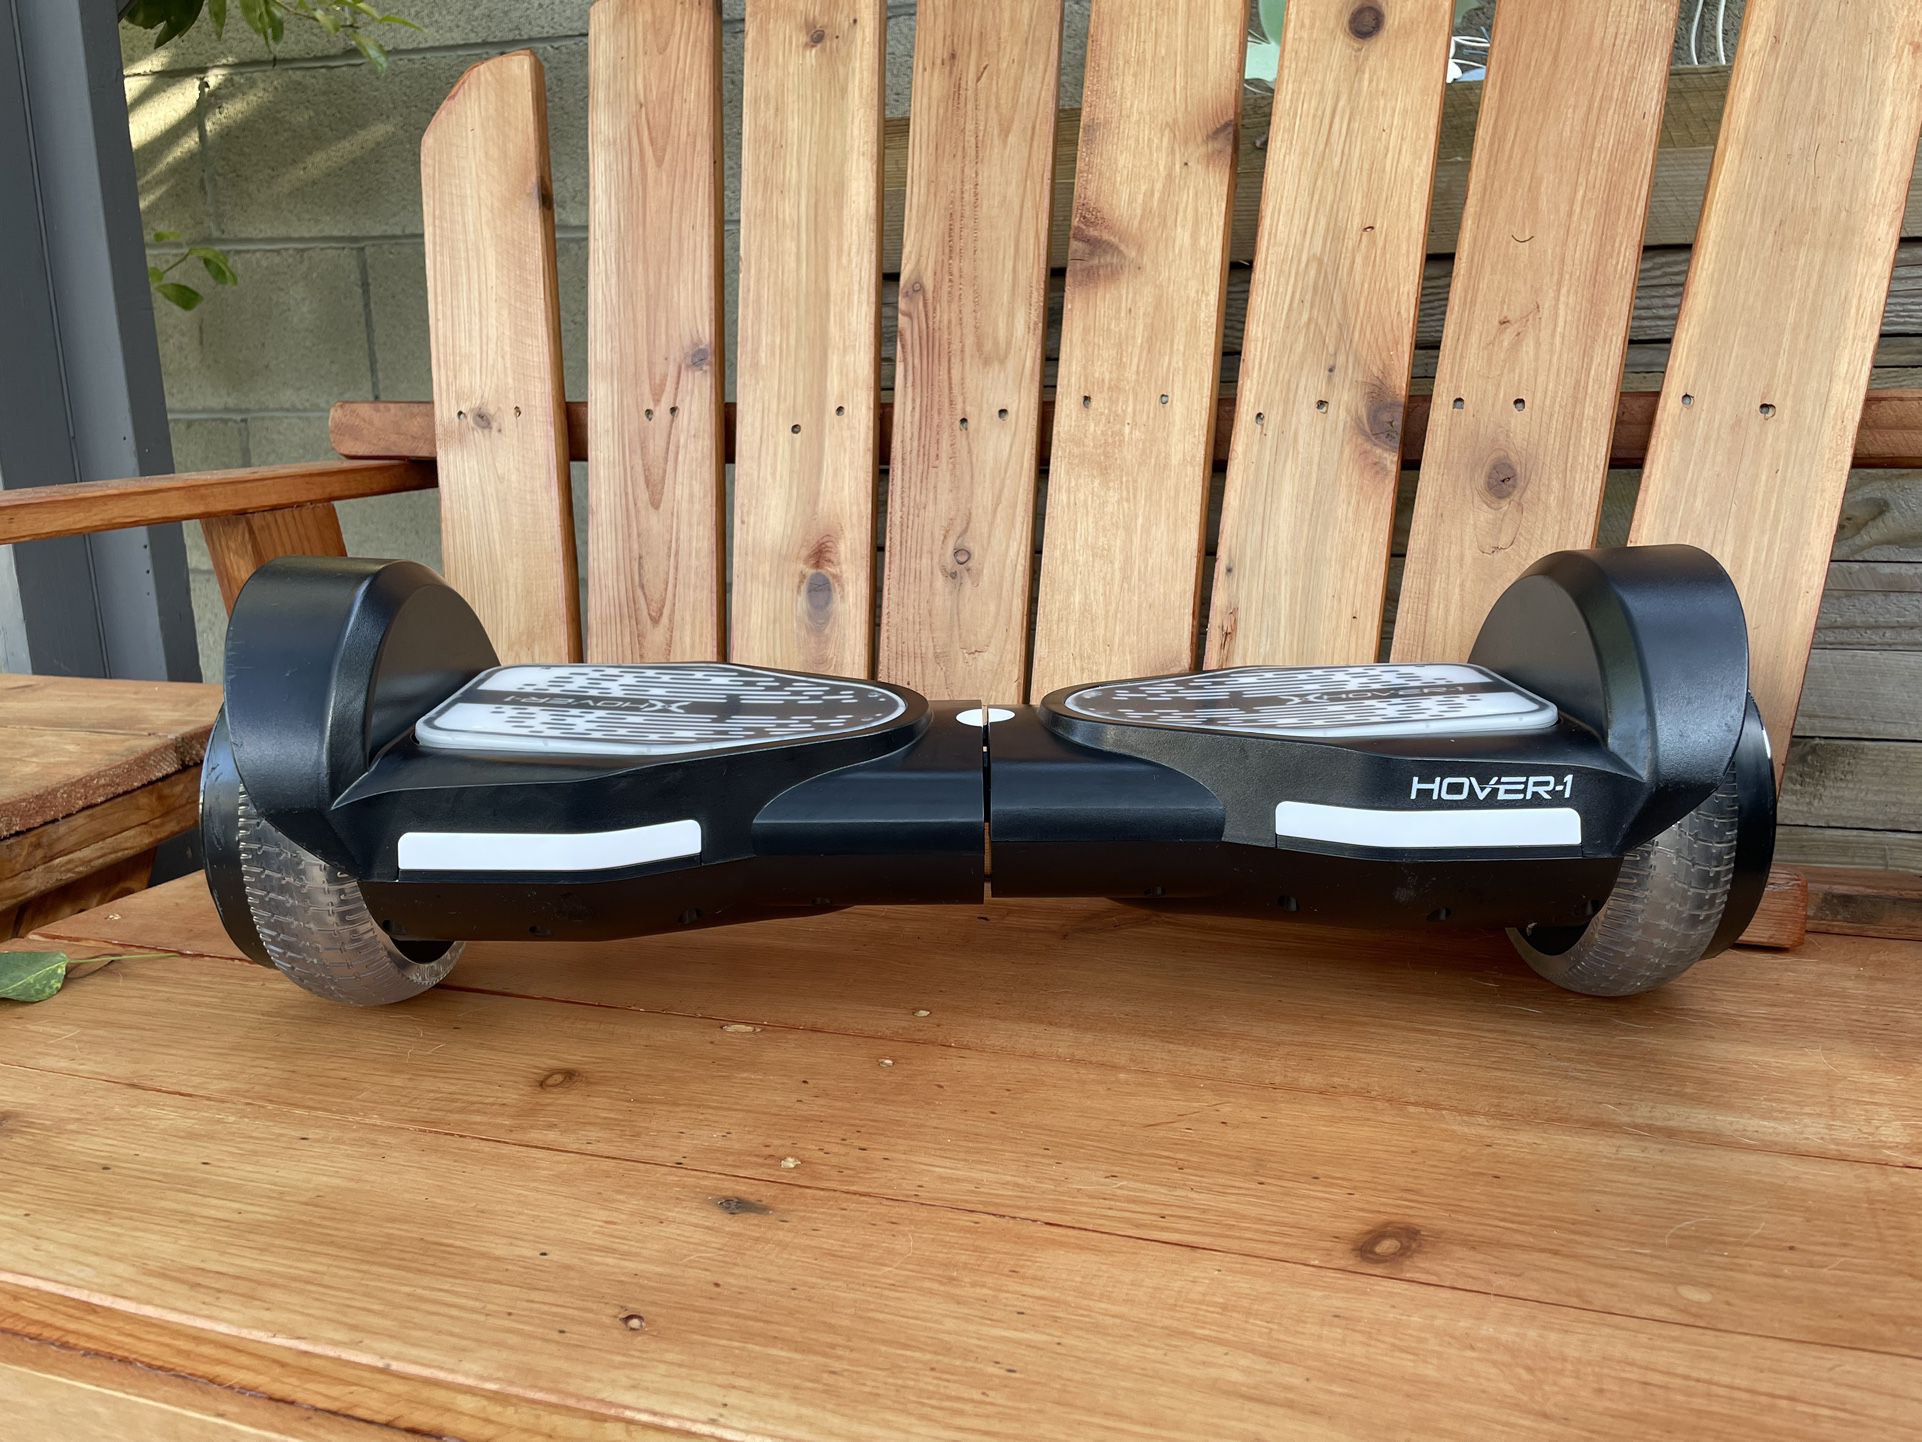 Hover-1 All-Star 2.0 Hoverboard